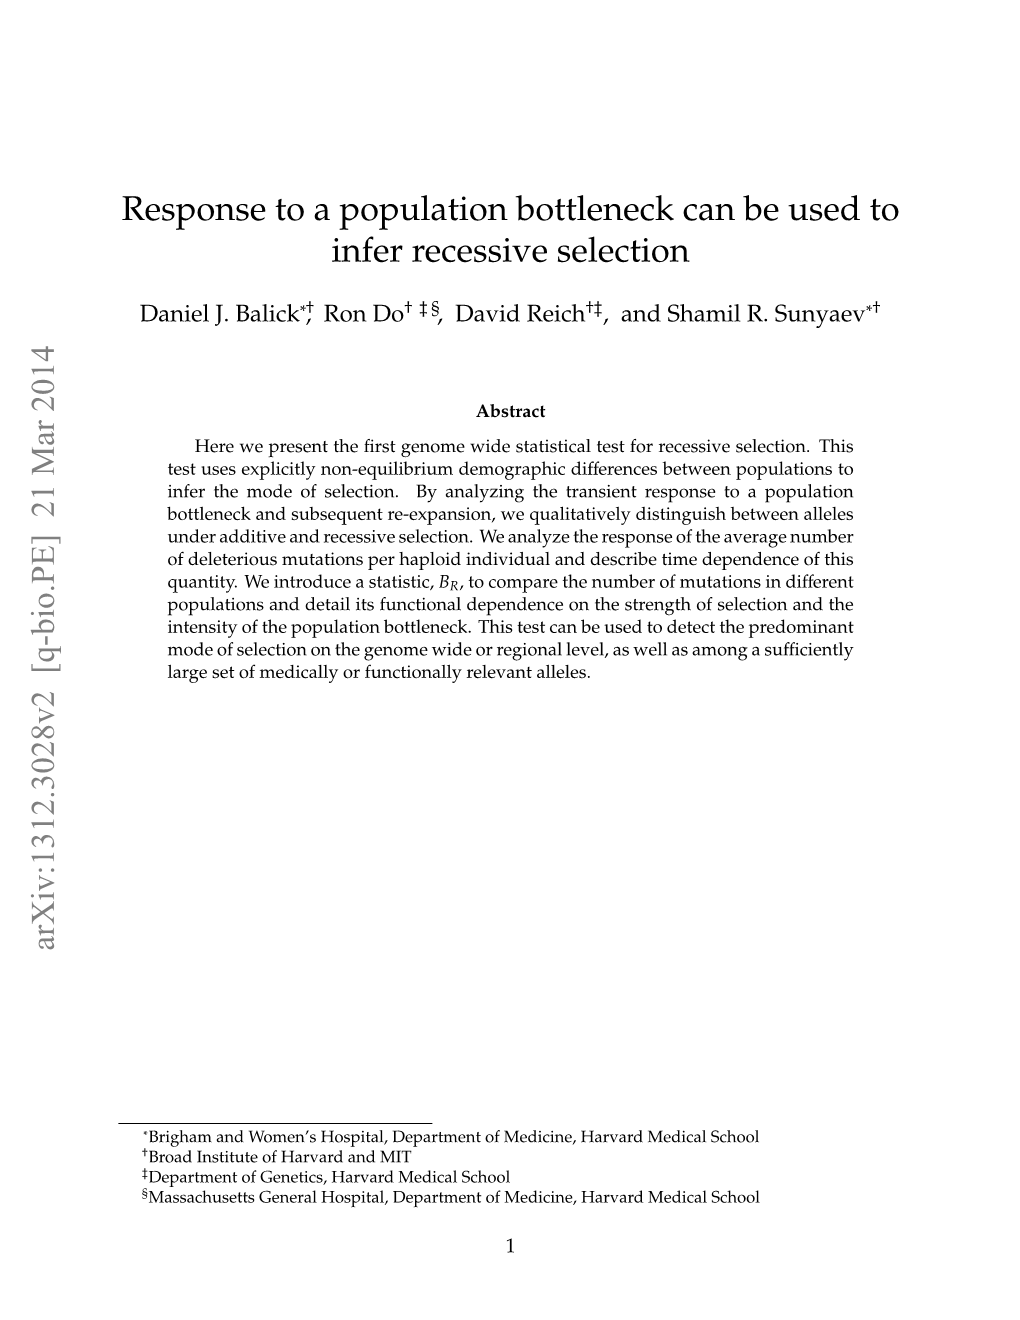 Response to a Population Bottleneck Can Be Used to Infer Recessive Selection Arxiv:1312.3028V2 [Q-Bio.PE] 21 Mar 2014